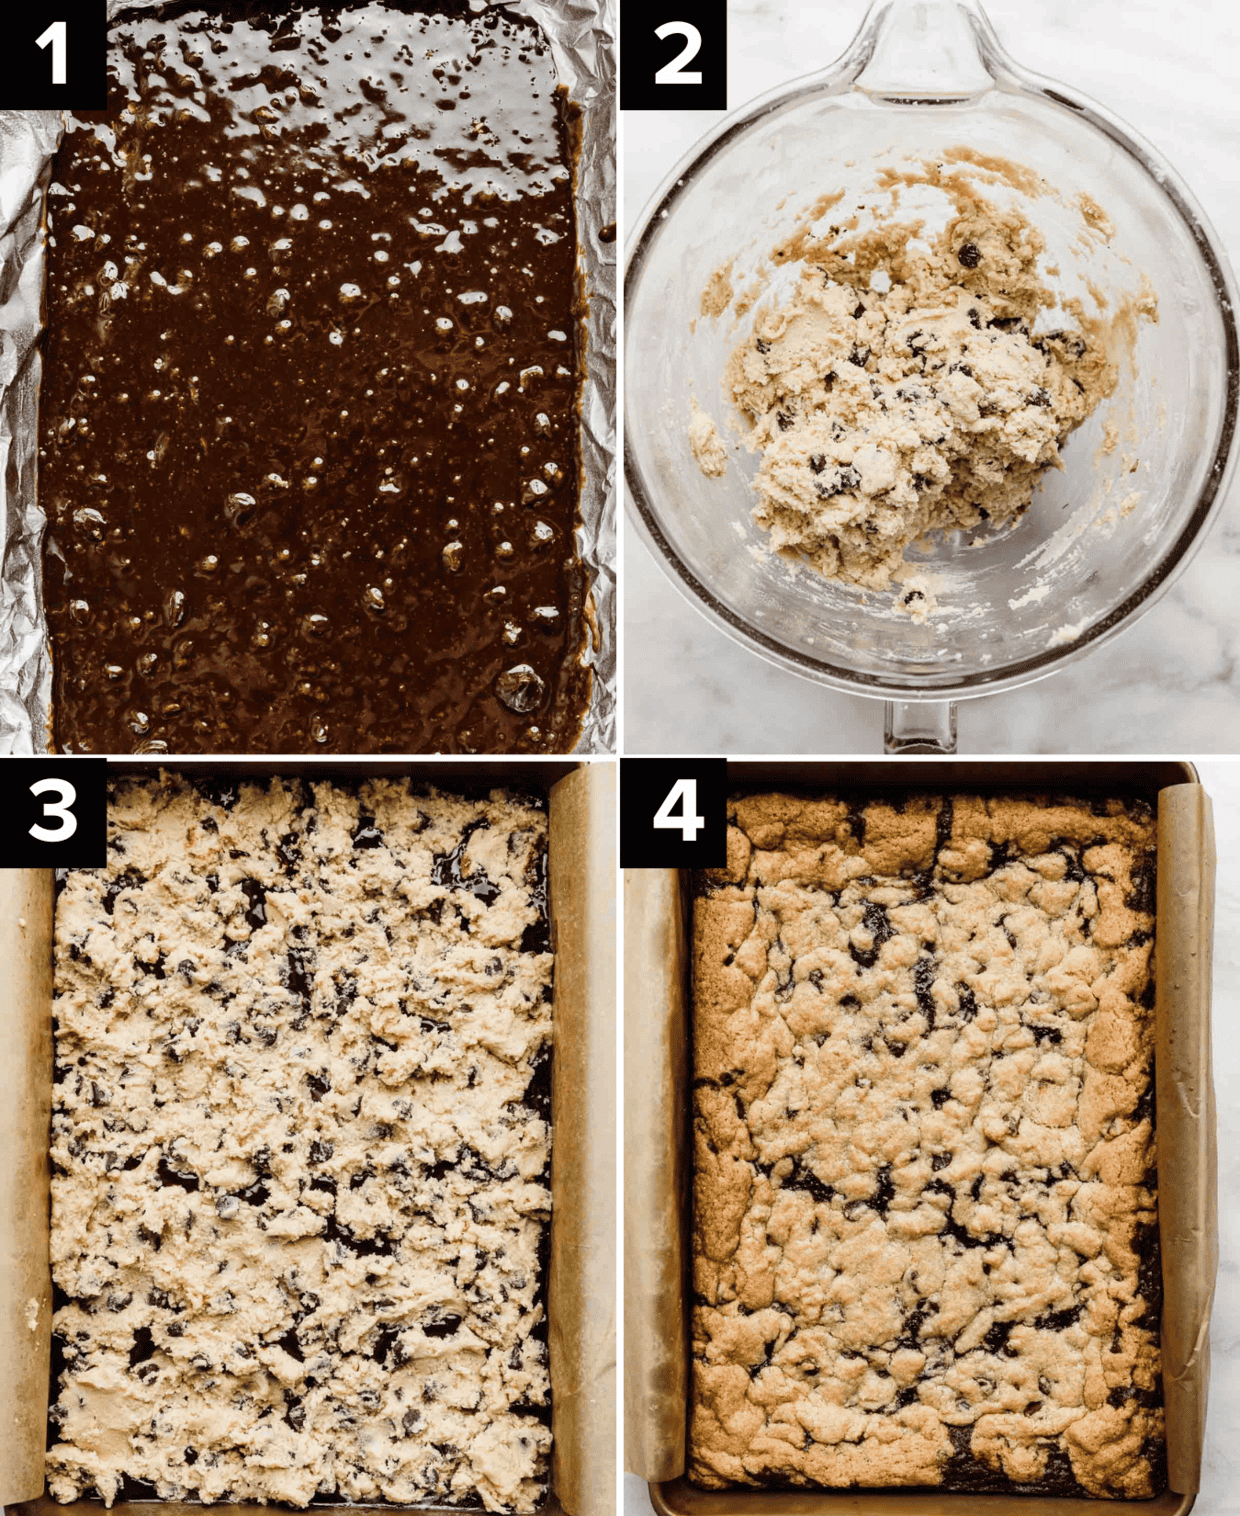 Four photos showing the process of making Brookies (brownie cookie bars), top left is brownie batter in a baking pan, top right is chocolate chip cookie dough in a glass bowl, bottom left is chocolate chip cookie dough in a baking sheet, bottom right image is baked Brookies.